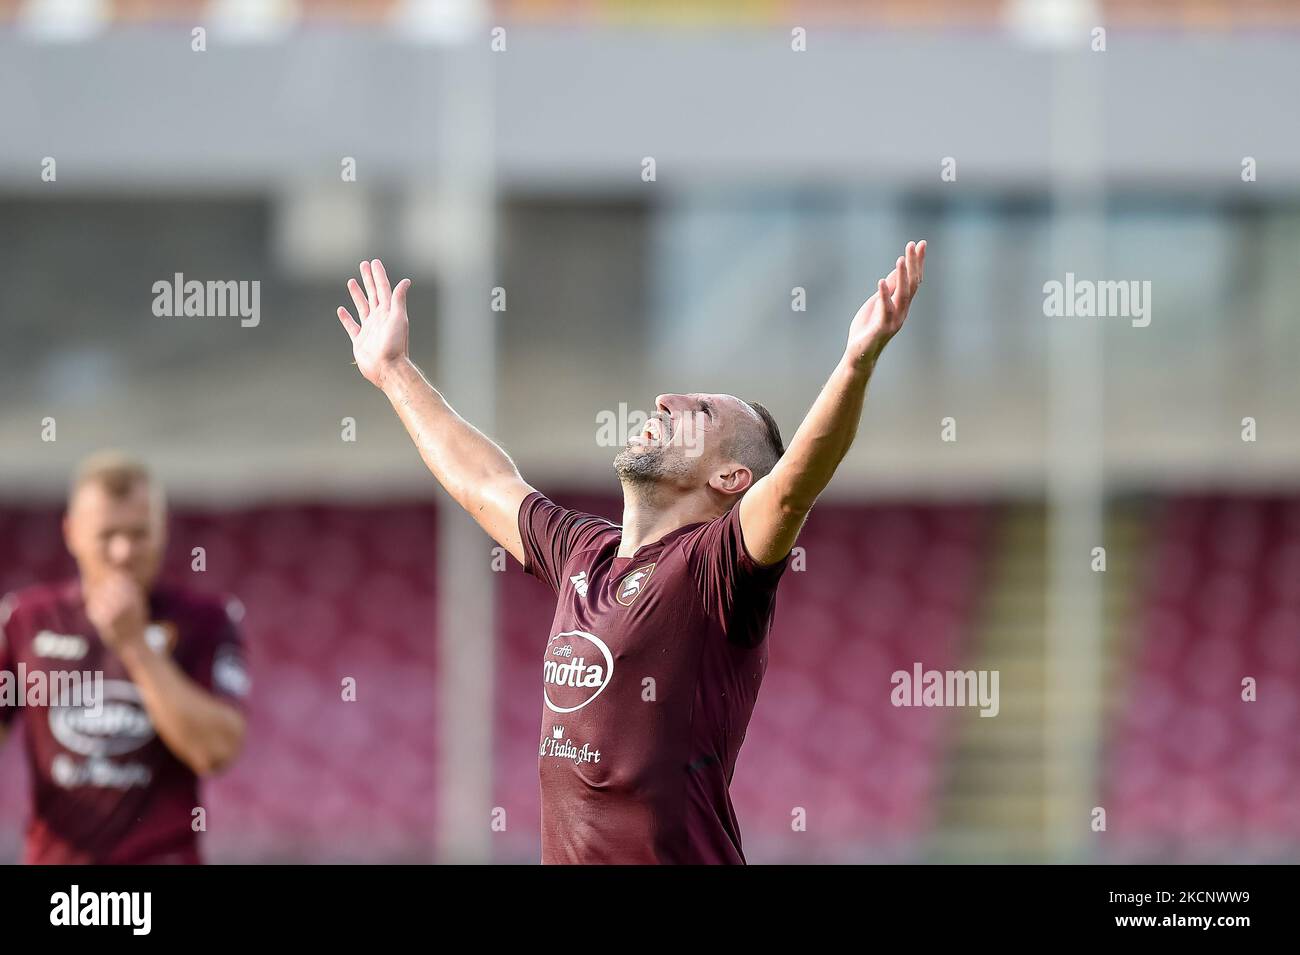 Franck Ribery of US Salernitana 1919 celebrates for the first victory with his new team during the Serie A match between US Salernitana 1919 and Genoa CFC at Stadio Arechi, Salerno, Italy on 2 October 2021. (Photo by Giuseppe Maffia/NurPhoto) Stock Photo